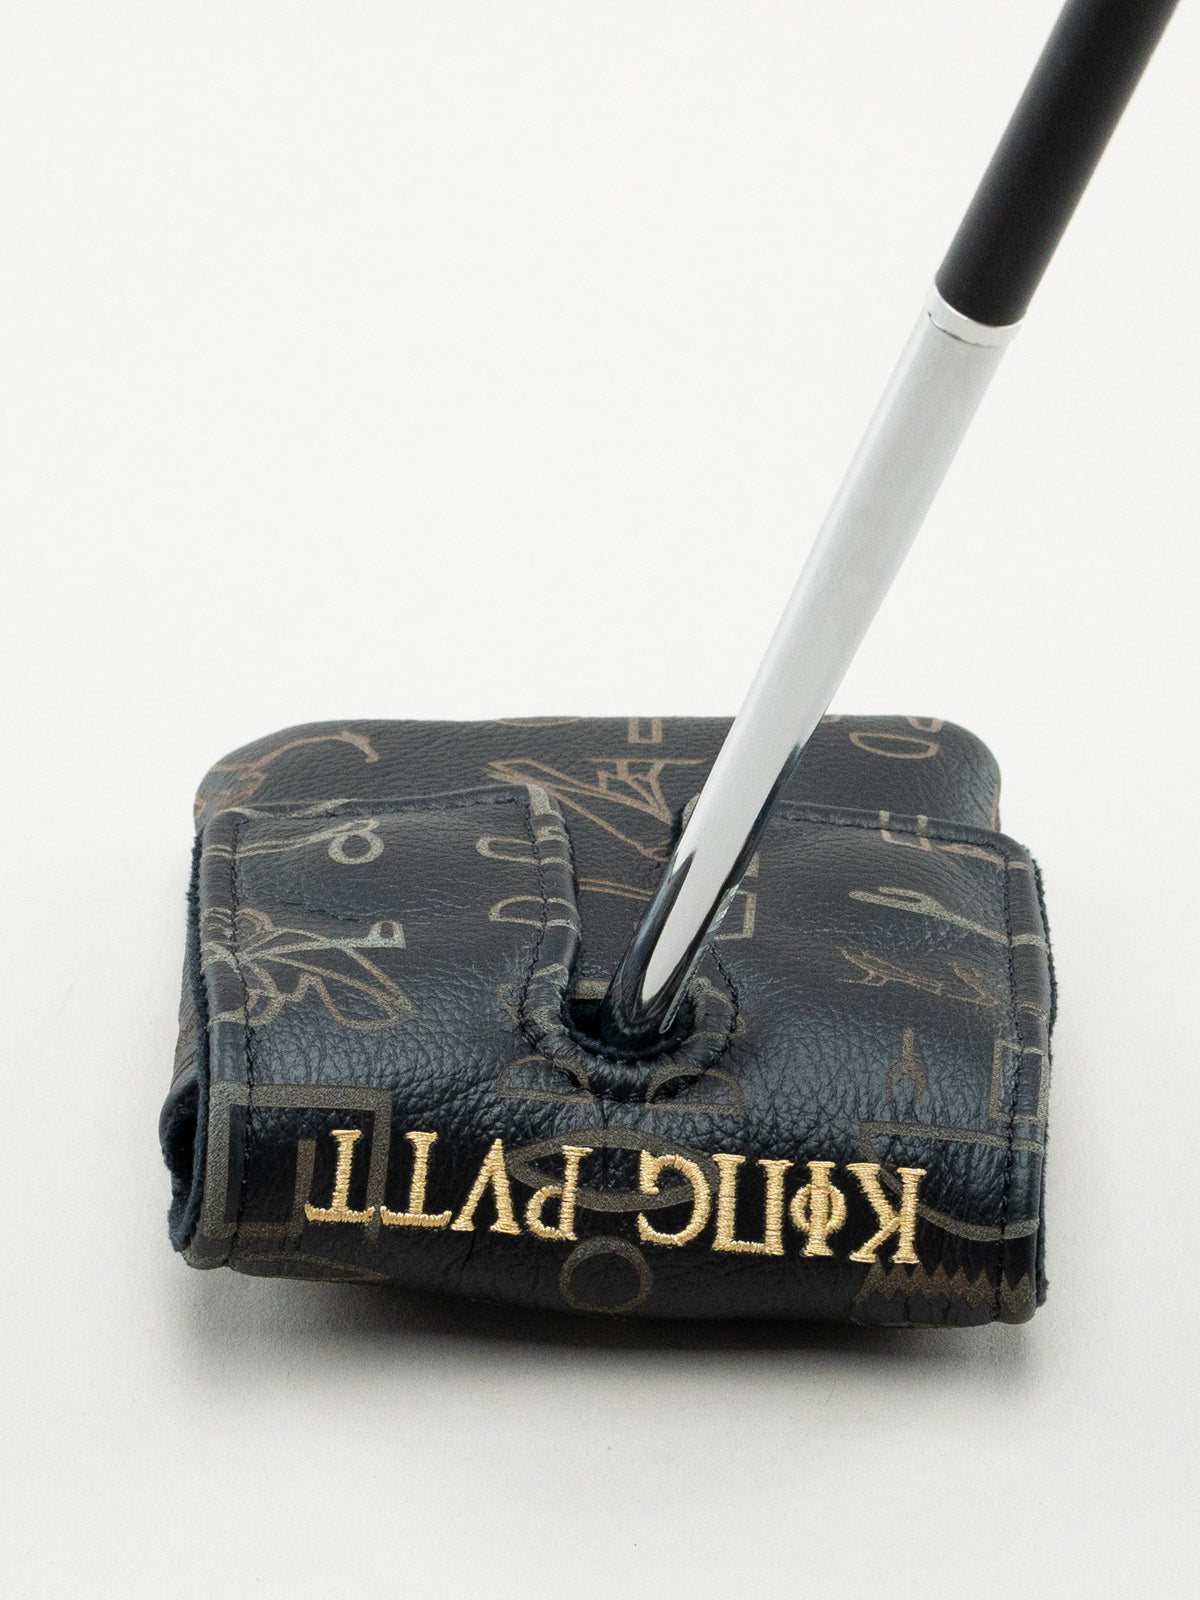 Dormie King Putt Center Shafted Mallet Putter Headcover